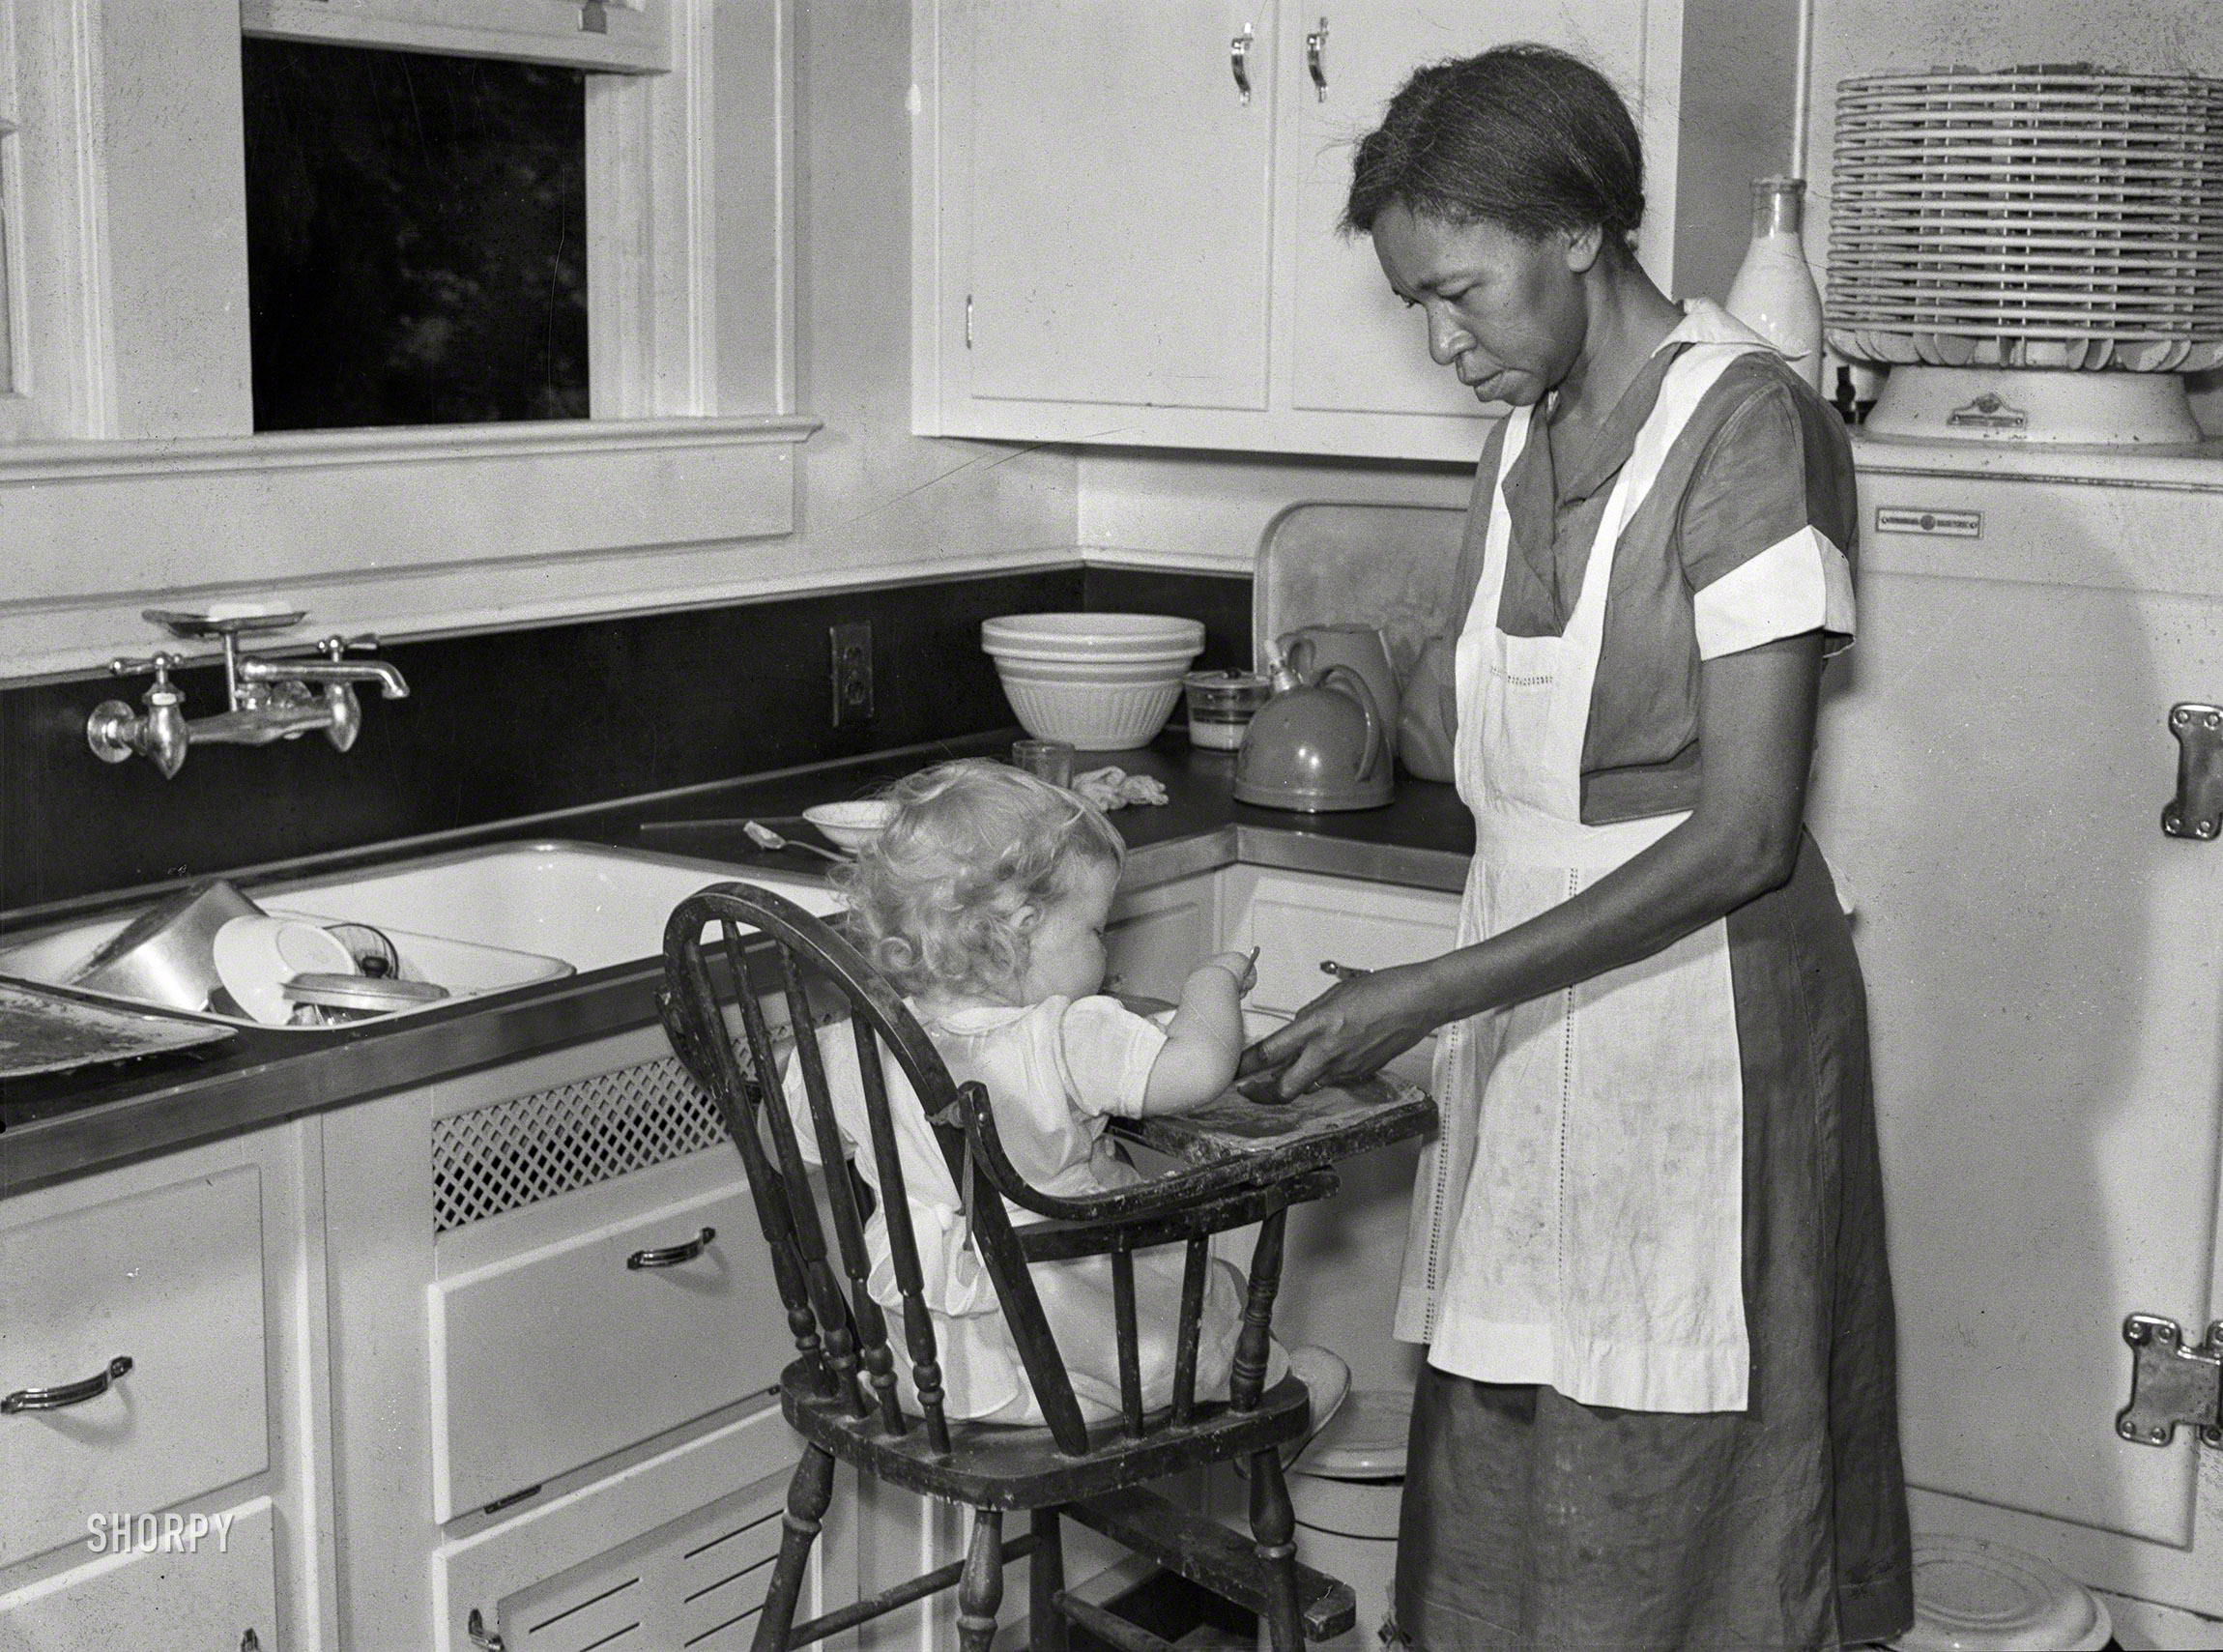 May 1939. "Negro domestic servant. Atlanta, Georgia." Medium format negative by Marion Post Wolcott for the Farm Security Administration. View full size.